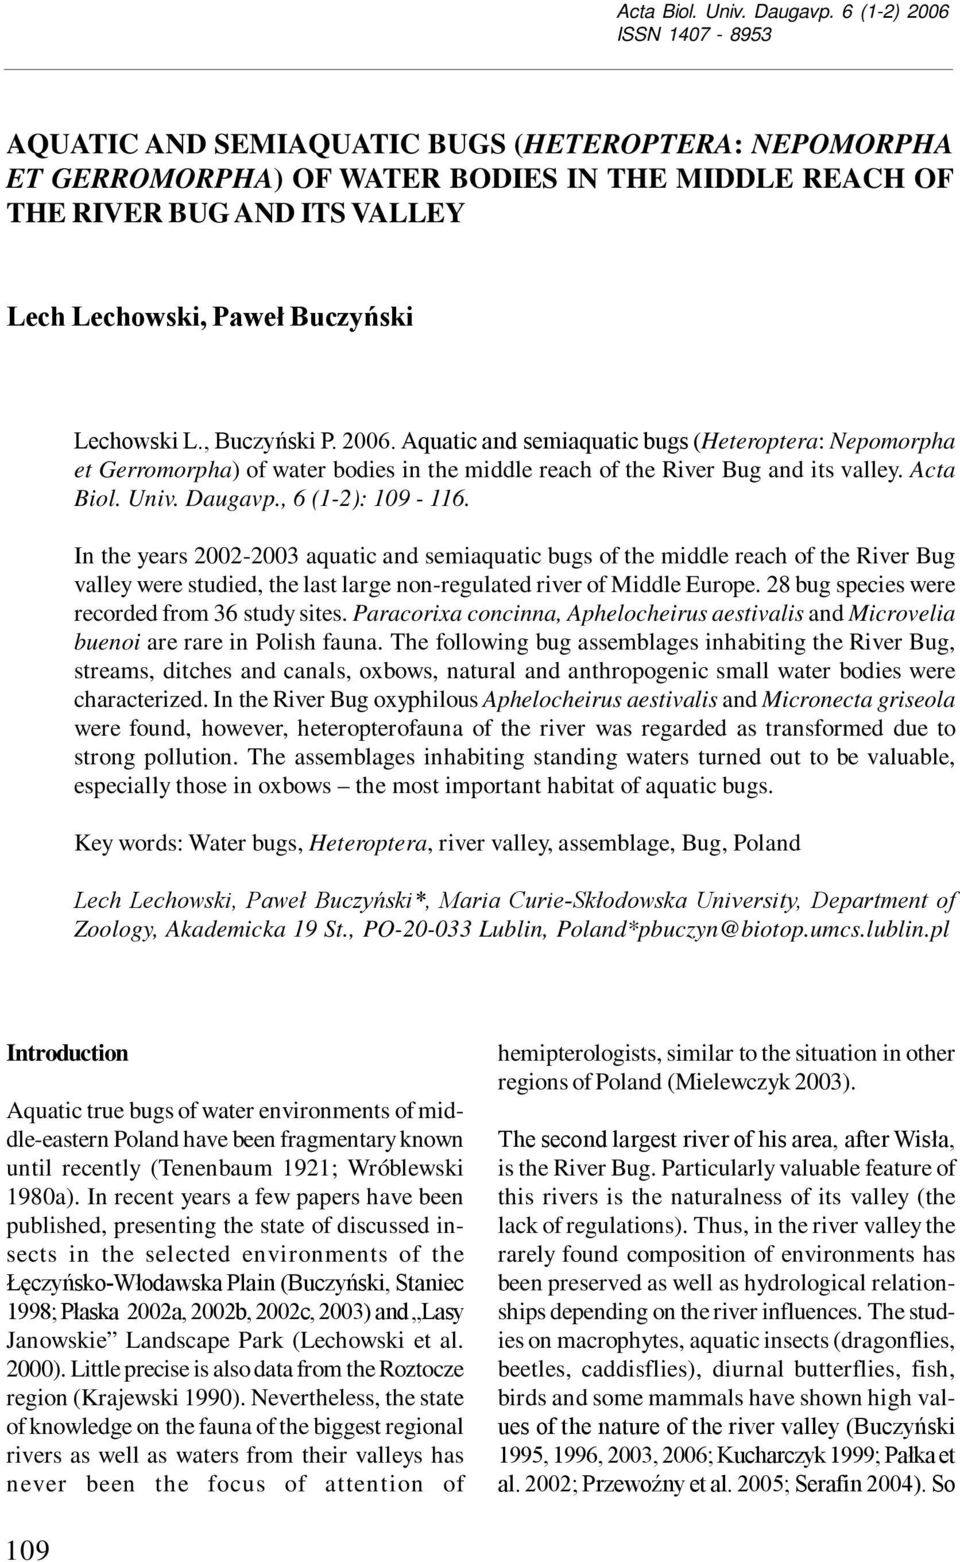 Lechowski L., Buczyński P. 2006. Aquatic and semiaquatic bugs (Heteroptera: Nepomorpha et Gerromorpha) of water bodies in the middle reach of the River Bug and its valley. , 6 (1-2): 109-116.